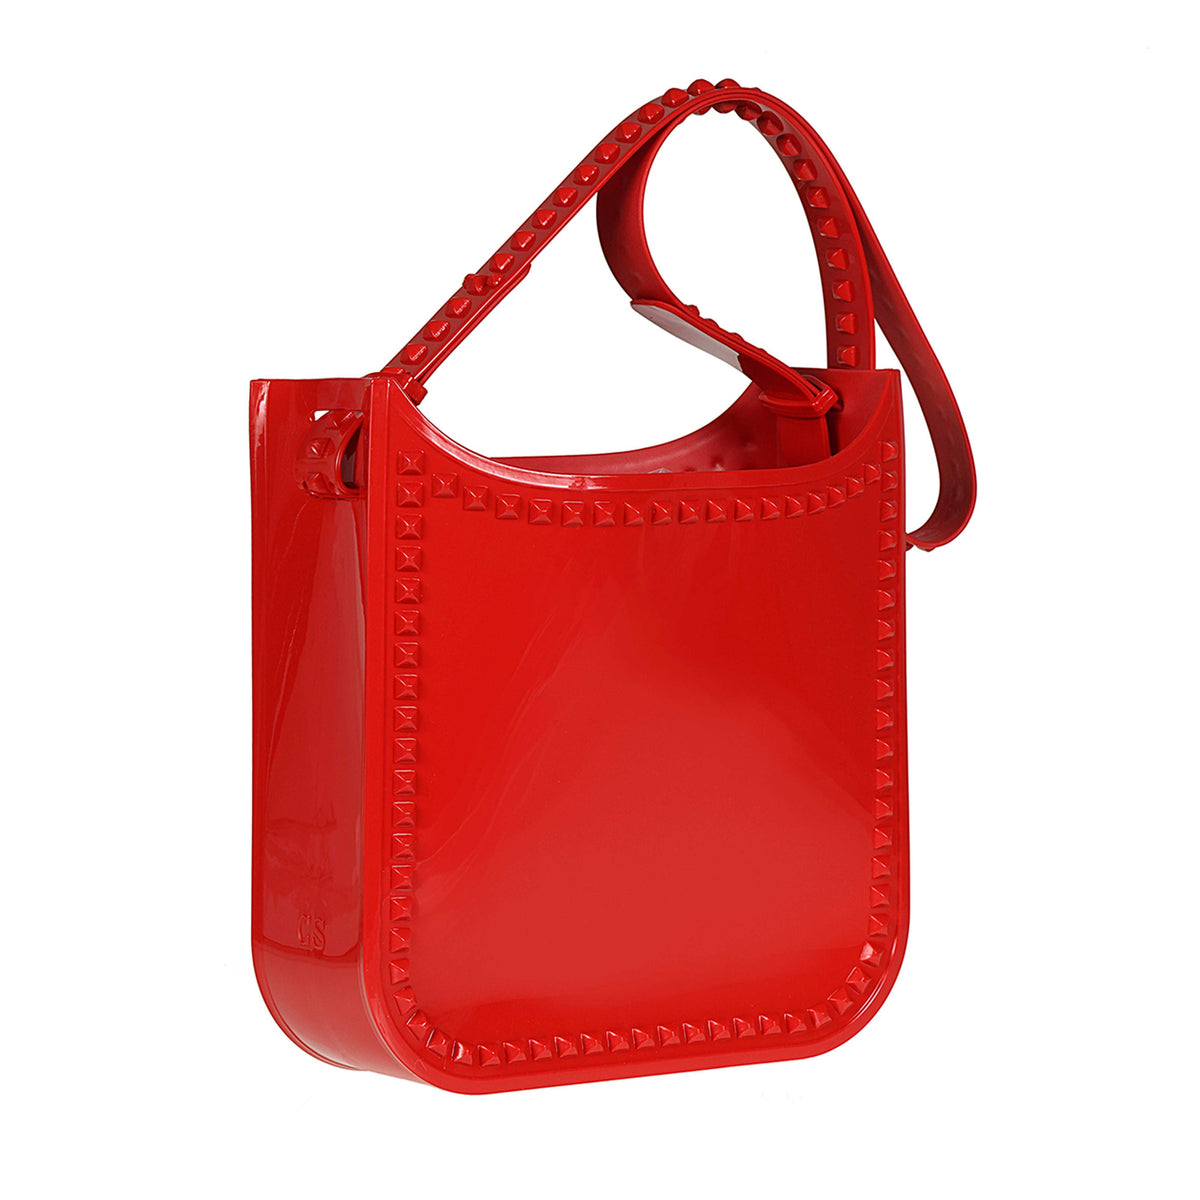 Fico red jelly bag with studded design for womens